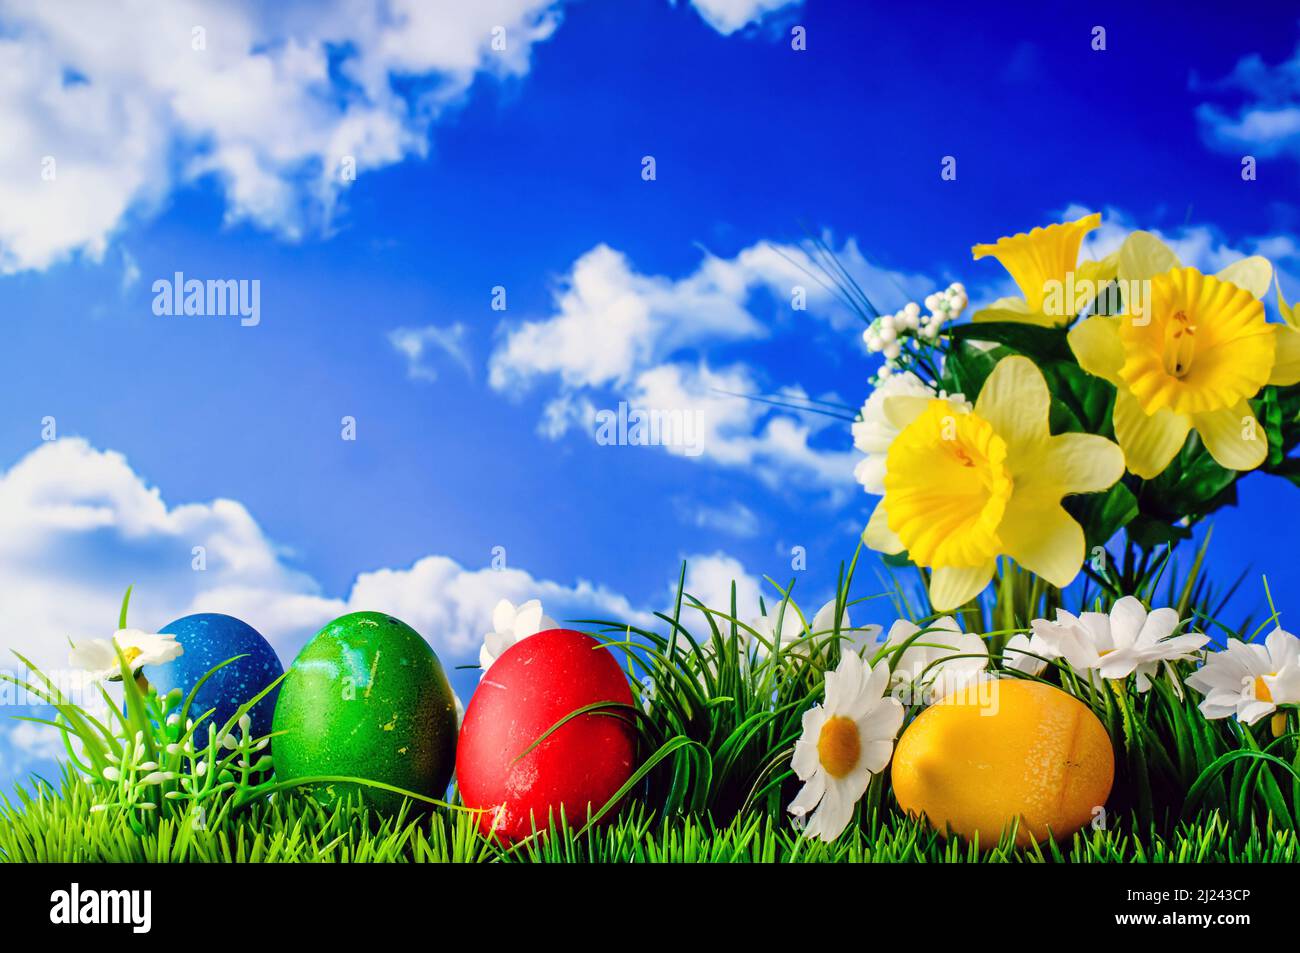 Easter composition, colored eggs in the grass with flowers against the sky, still life Stock Photo